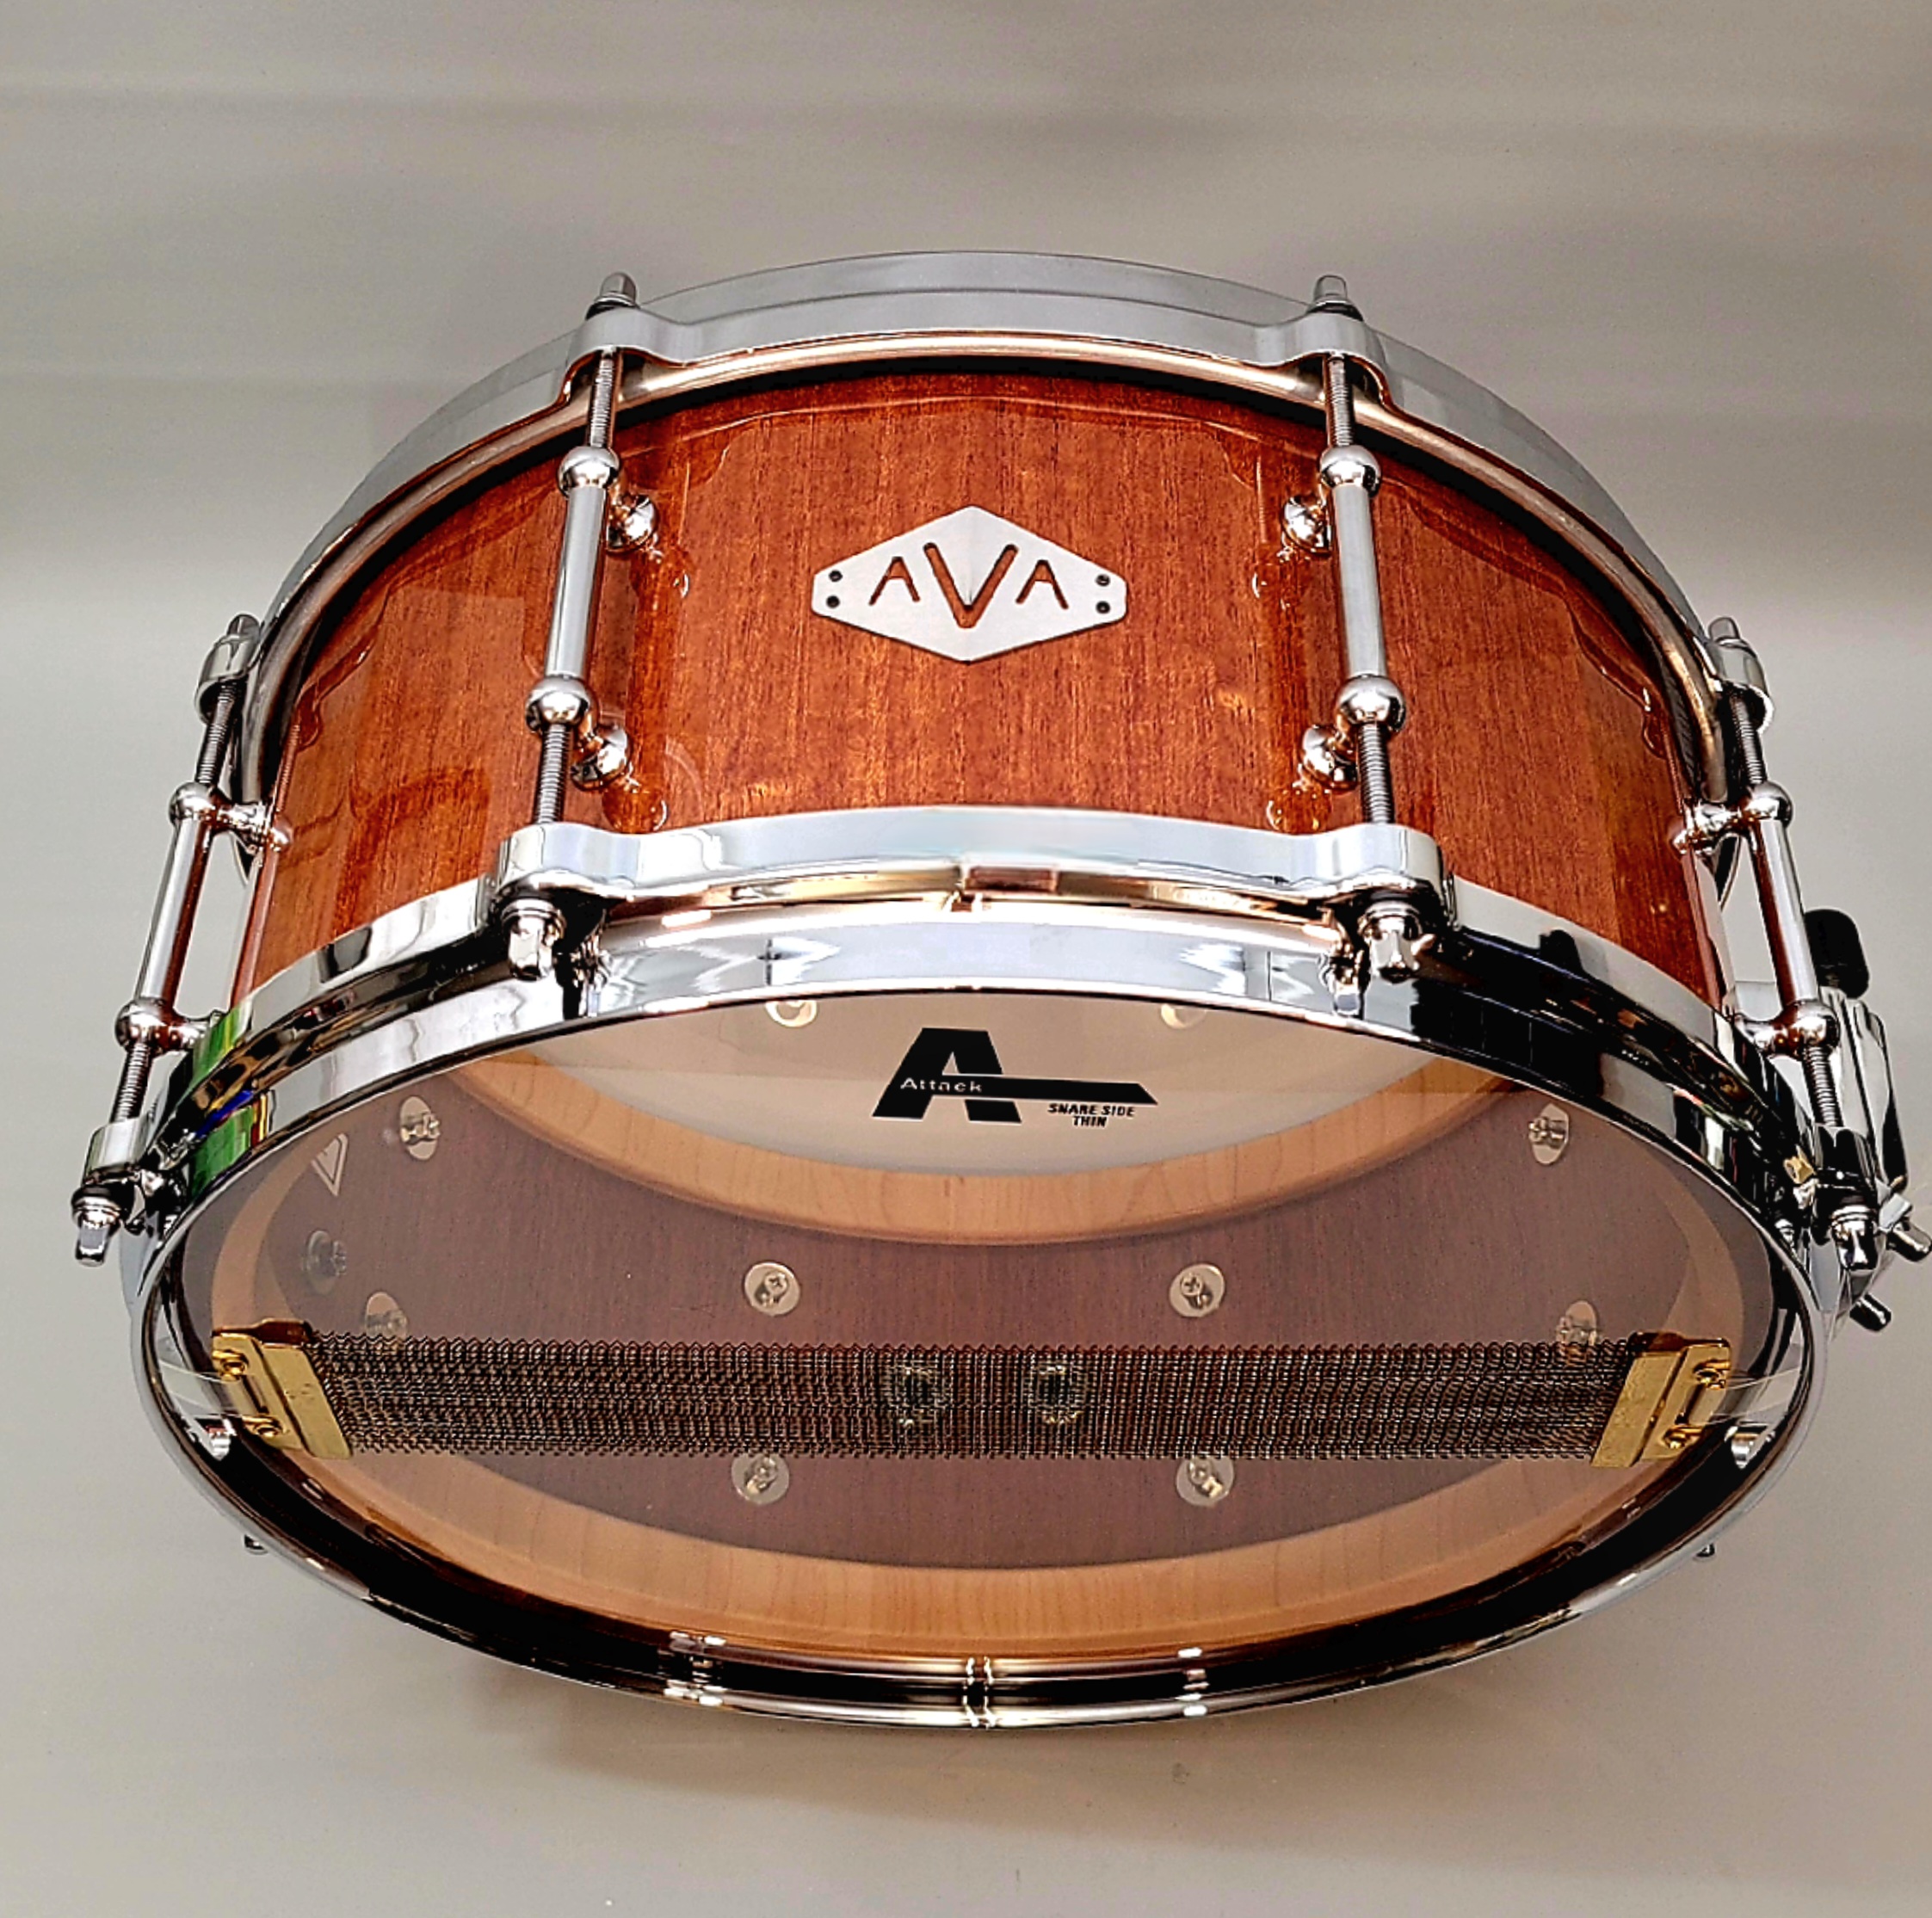 13 x 5.875 MAHOGANY STABLE-STAVE